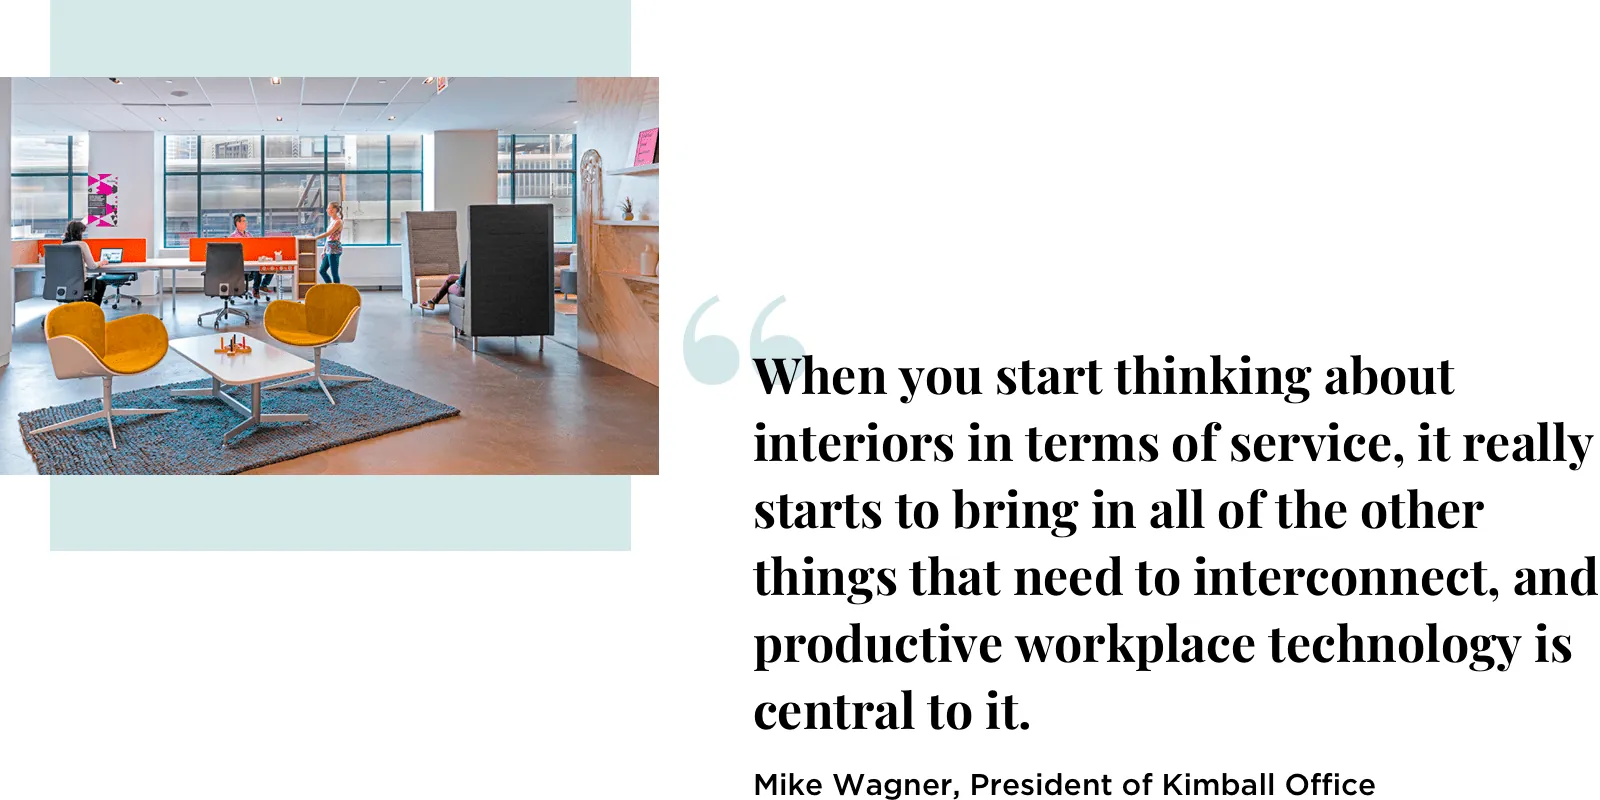 Future of work and the open office plan